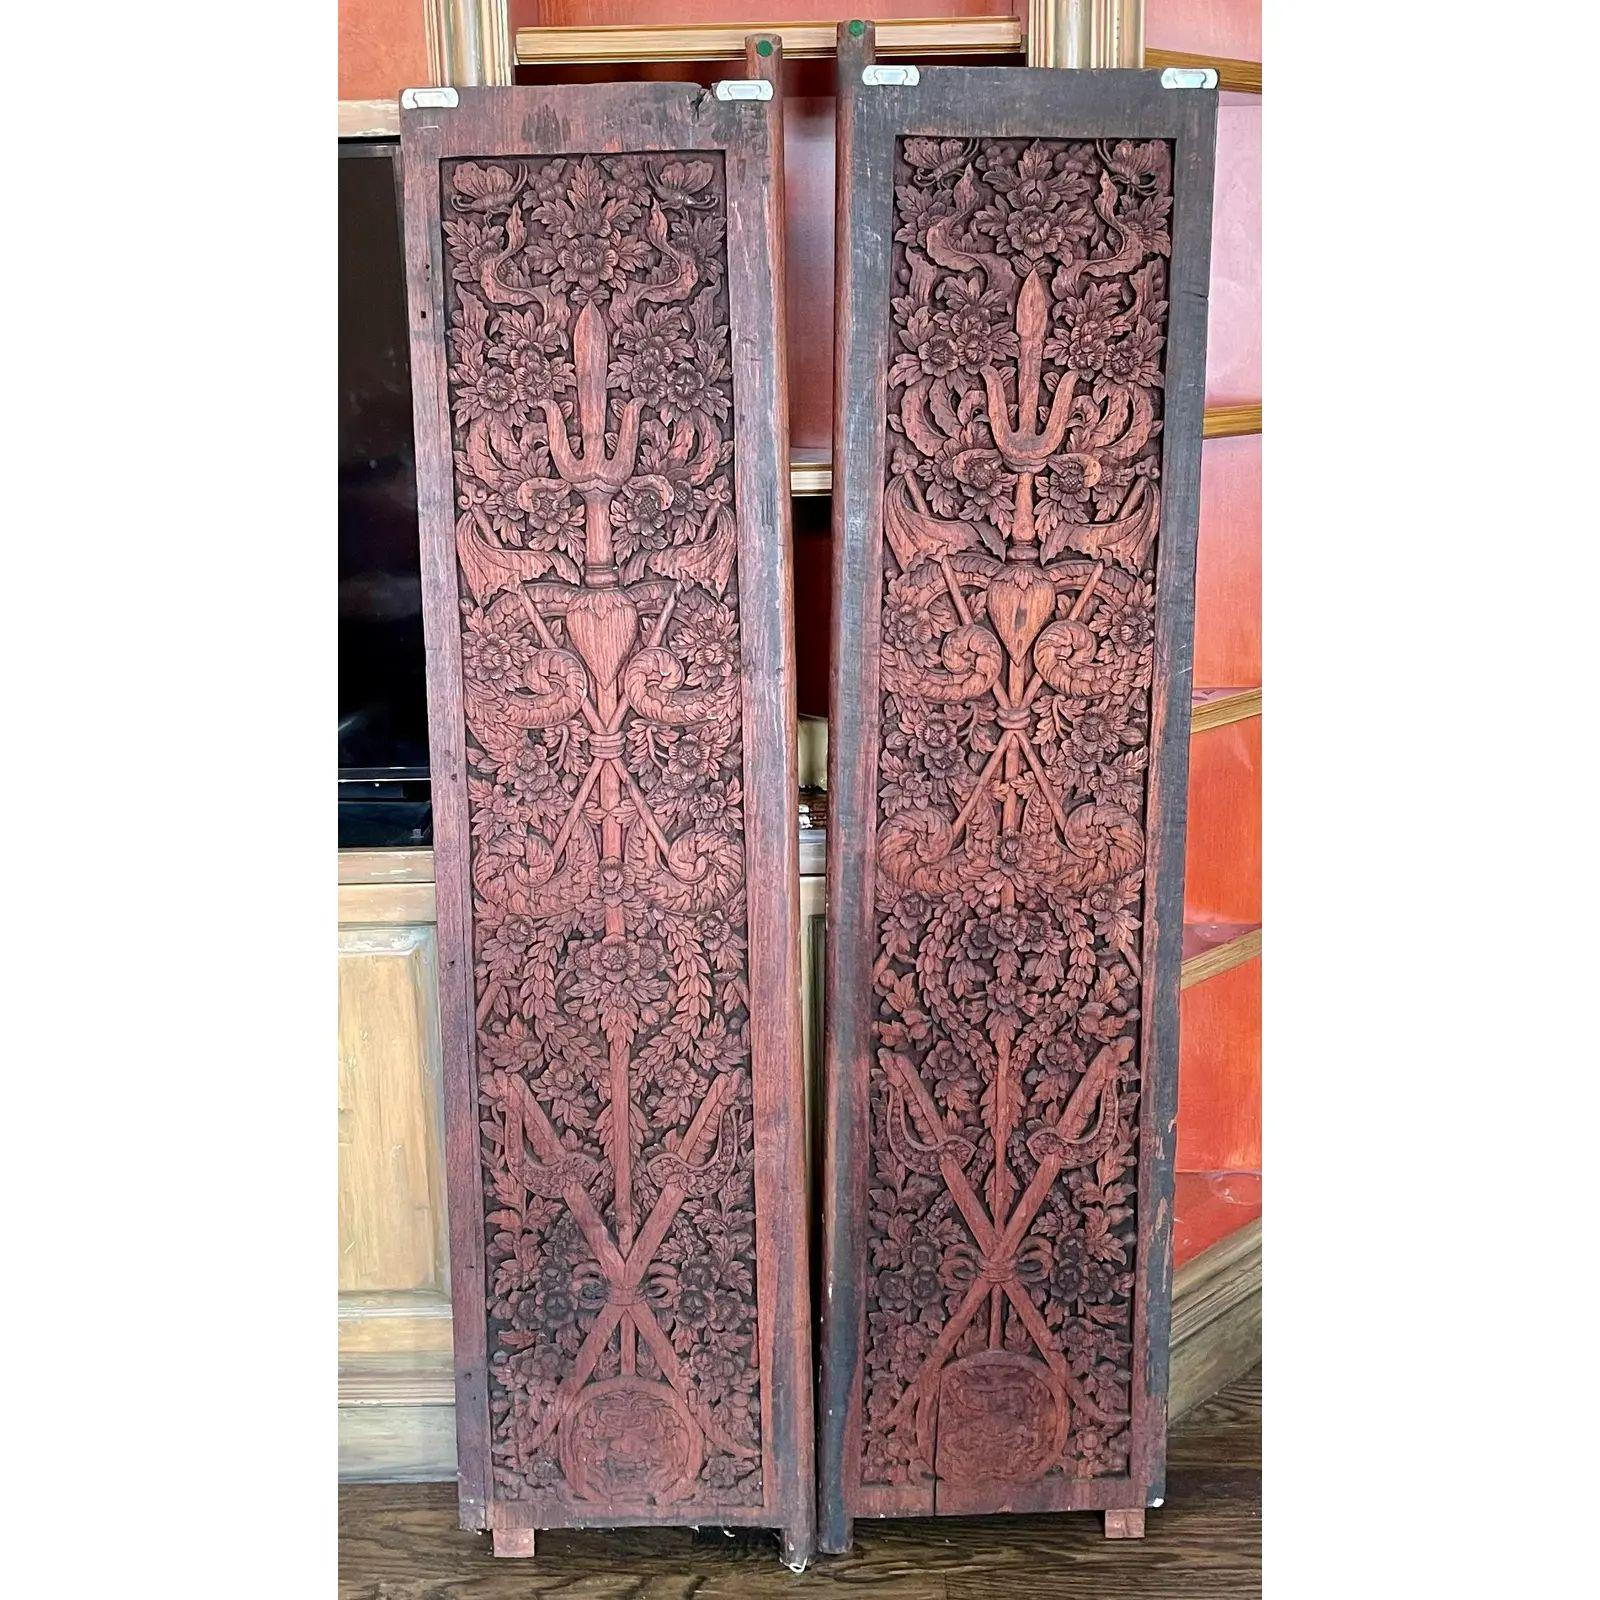 Antique Chinese scenic painted carved wood doors. Each door is beautifully carved on one side and candles painted on the other side with mang Ming style figures.

Additional information: 
Materials: paint, wood
Color: red
Period: 19th